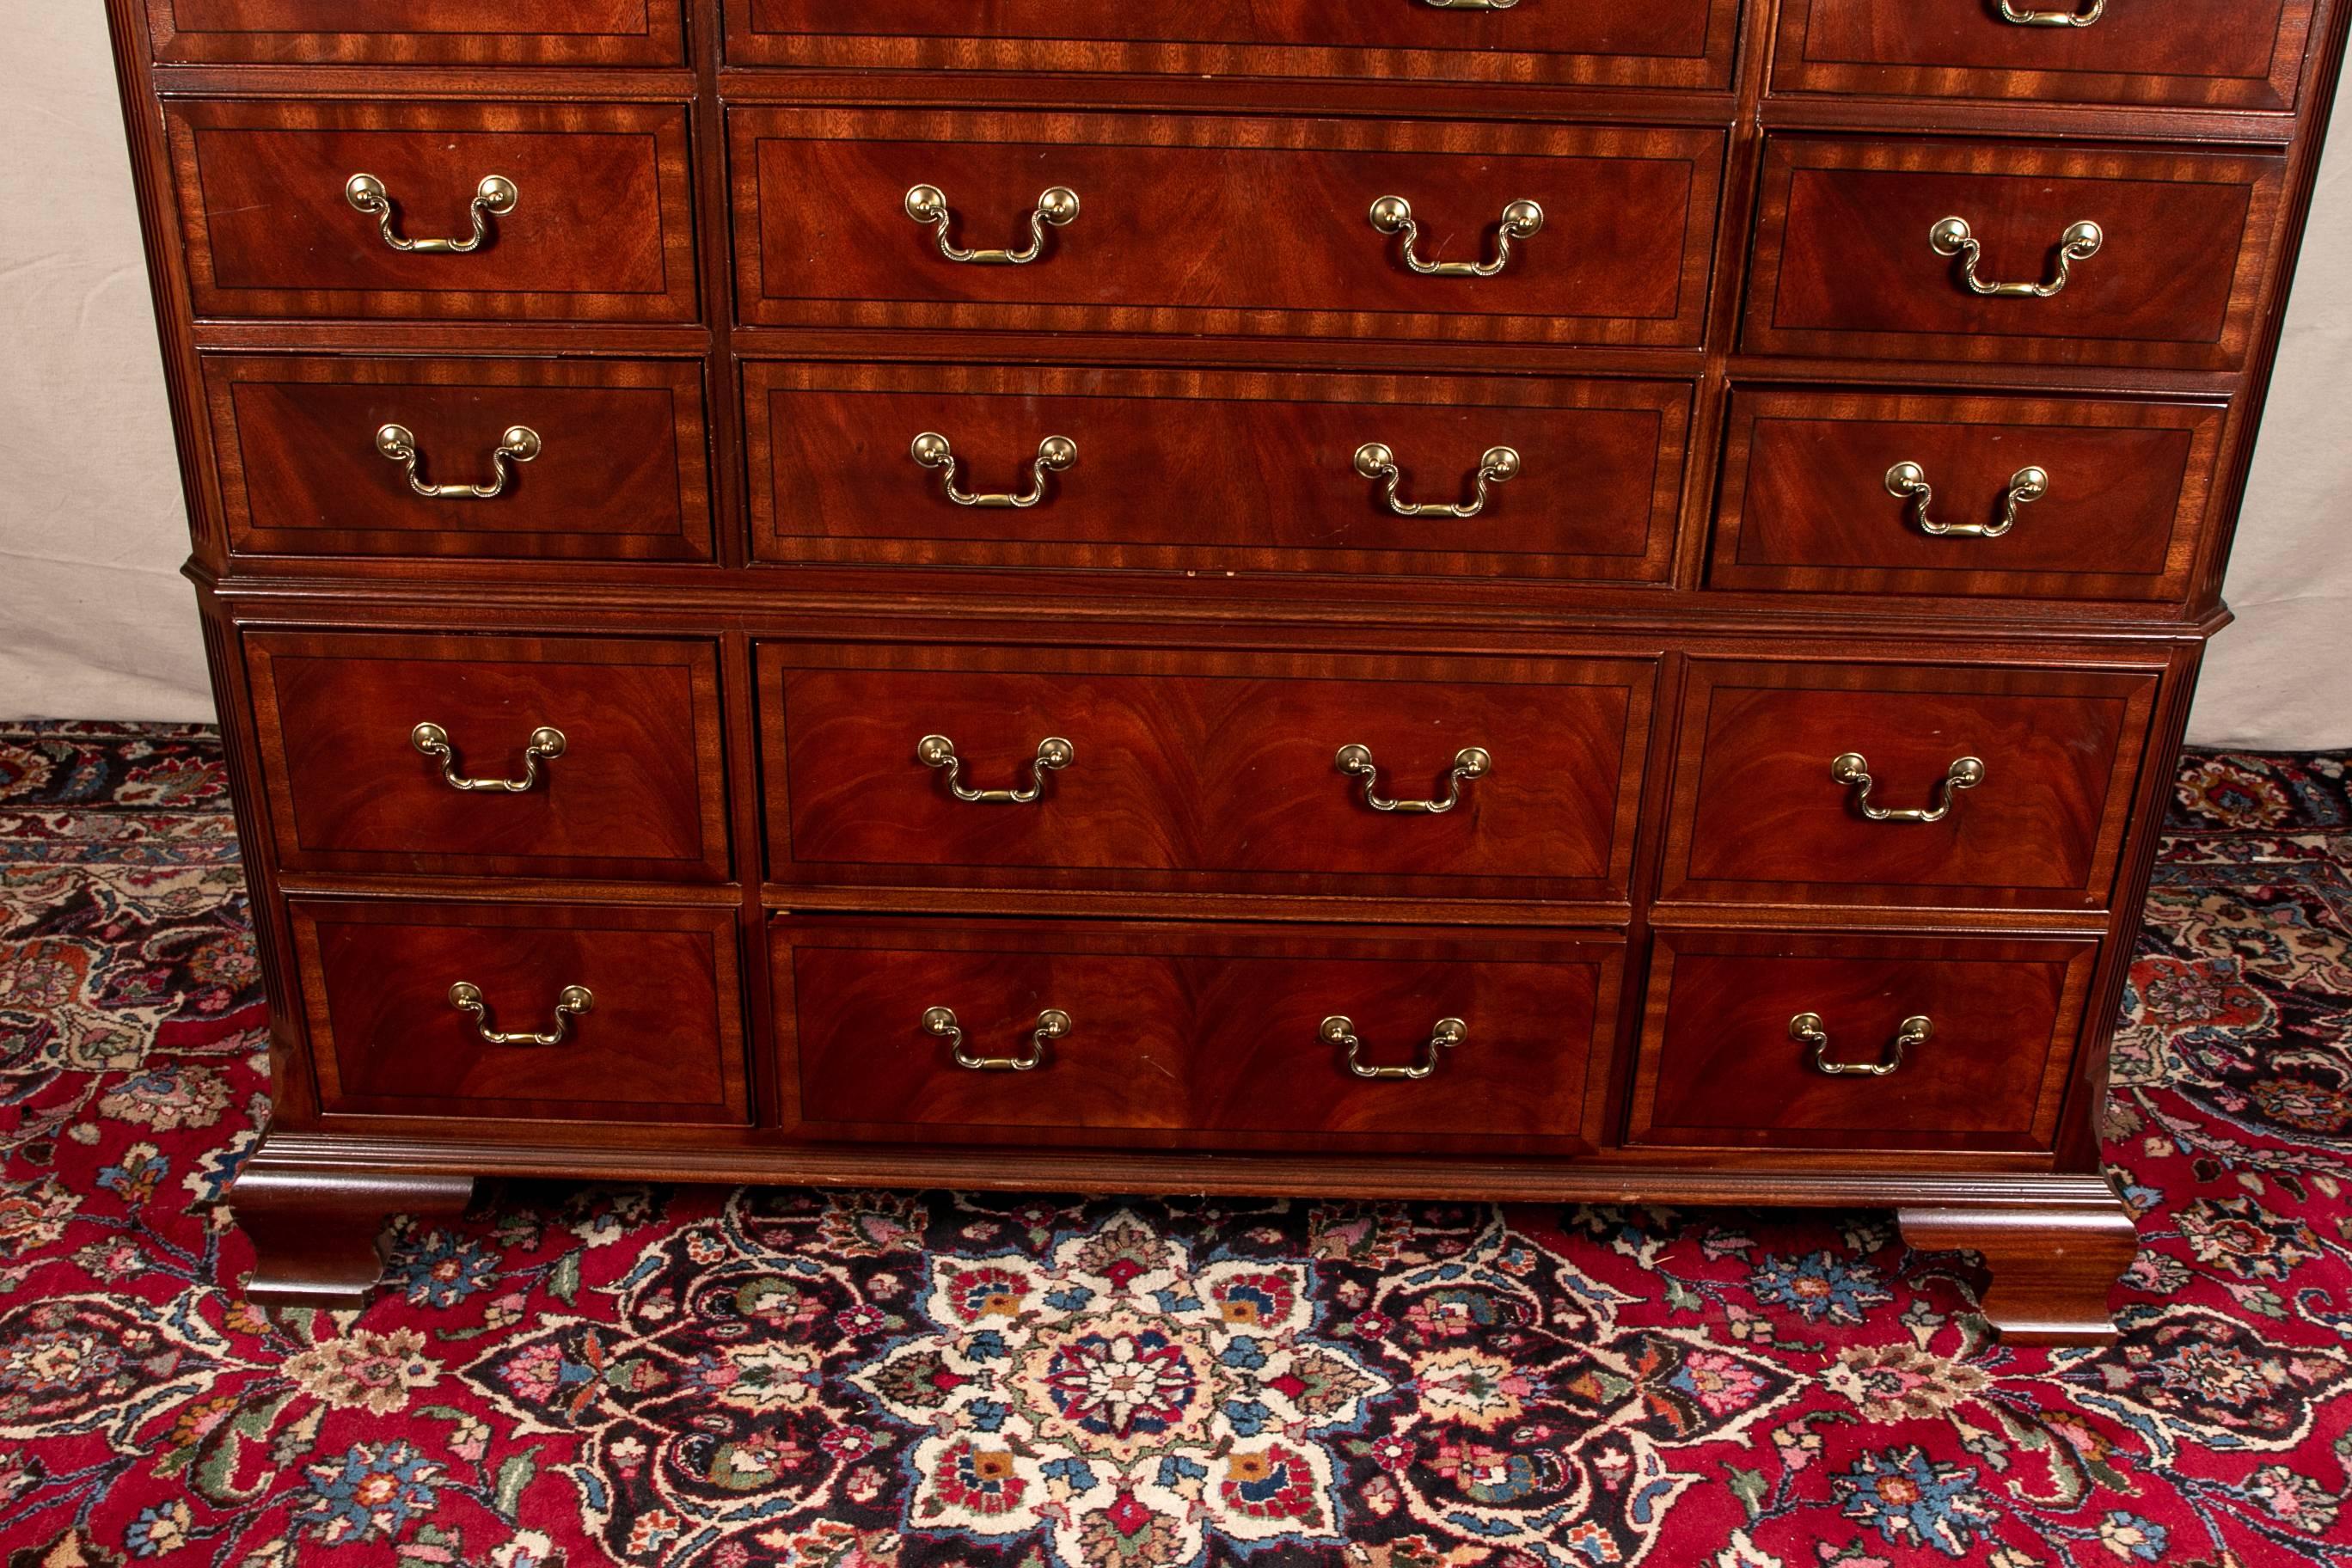 Ethan Allen 18th century style mule chest, mahogany, carved cornice over a cabinet with fluted canted corners with acanthus leaf tops, top cabinet with three banks of banded drawers- four short flank four long ones, the lower cabinet with two banded